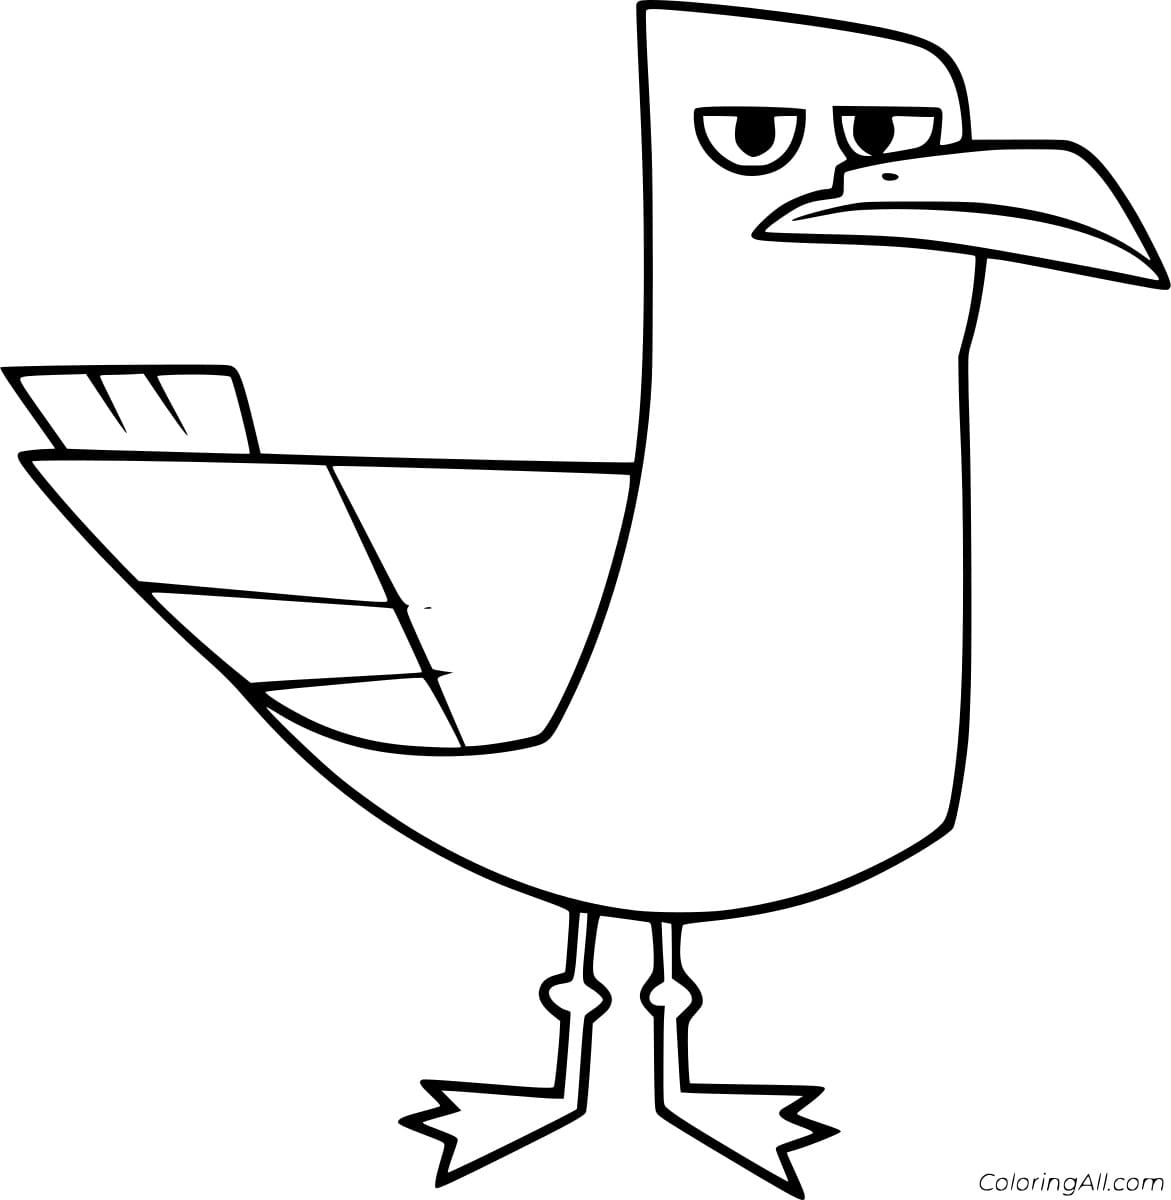 Cartoon Funny Seagull Coloring Page